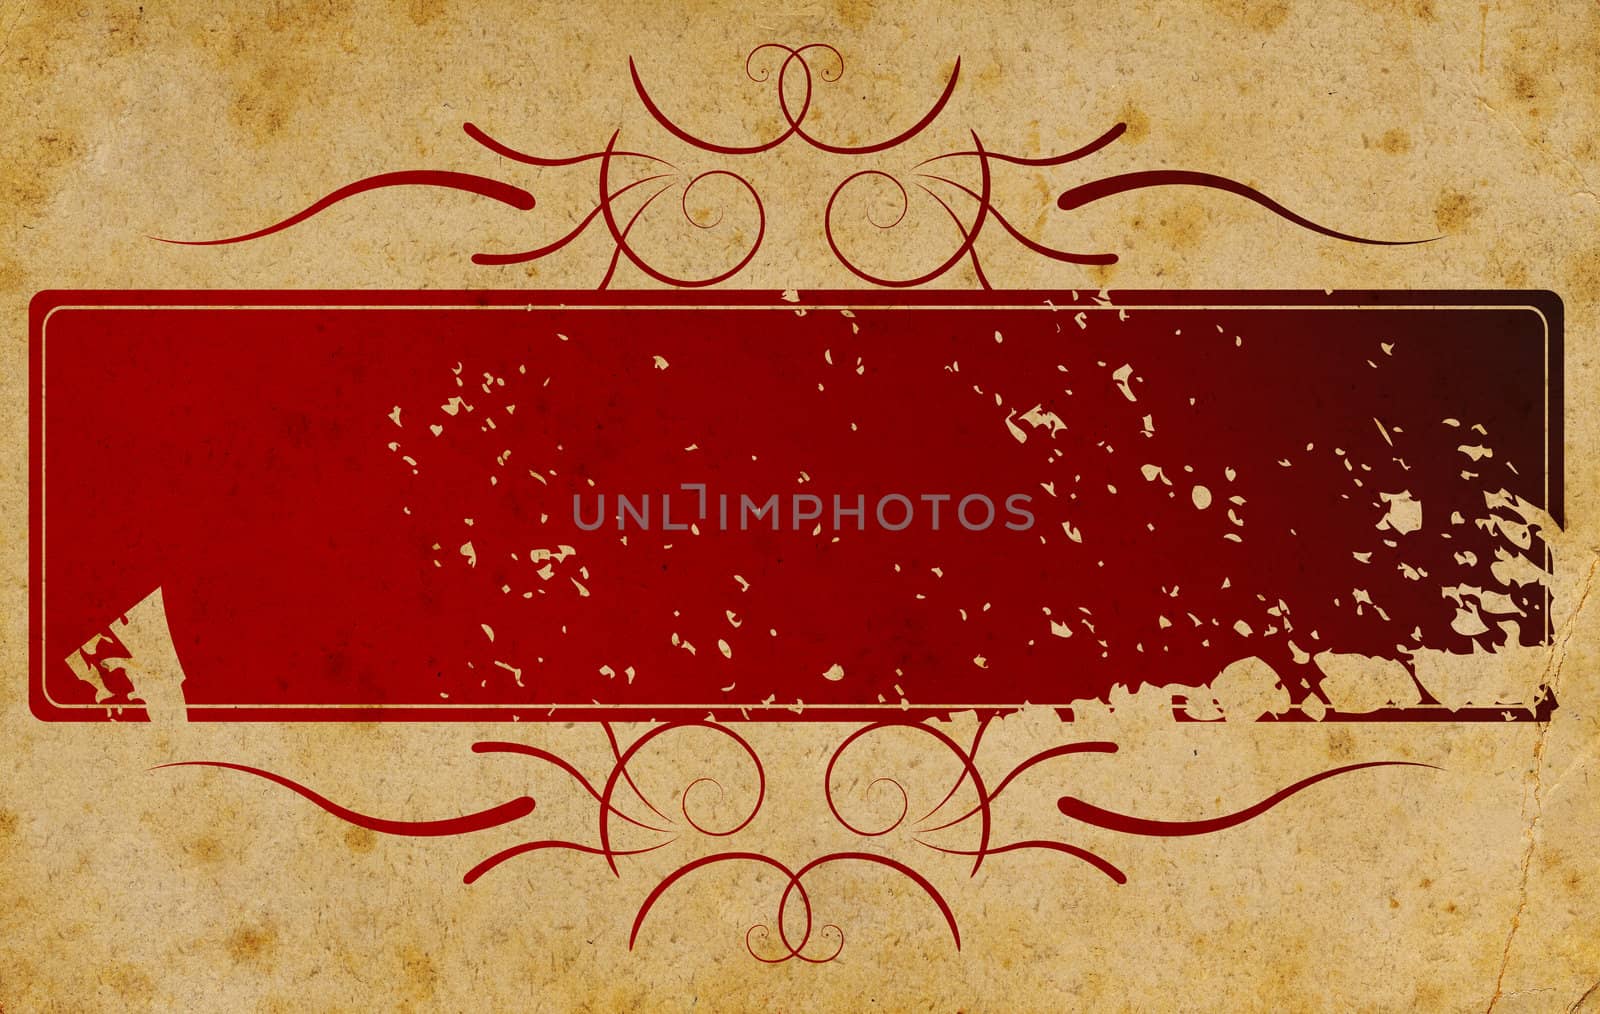 Computer designed highly detailed grunge textured retro style paper background. Nice grunge element for your projects